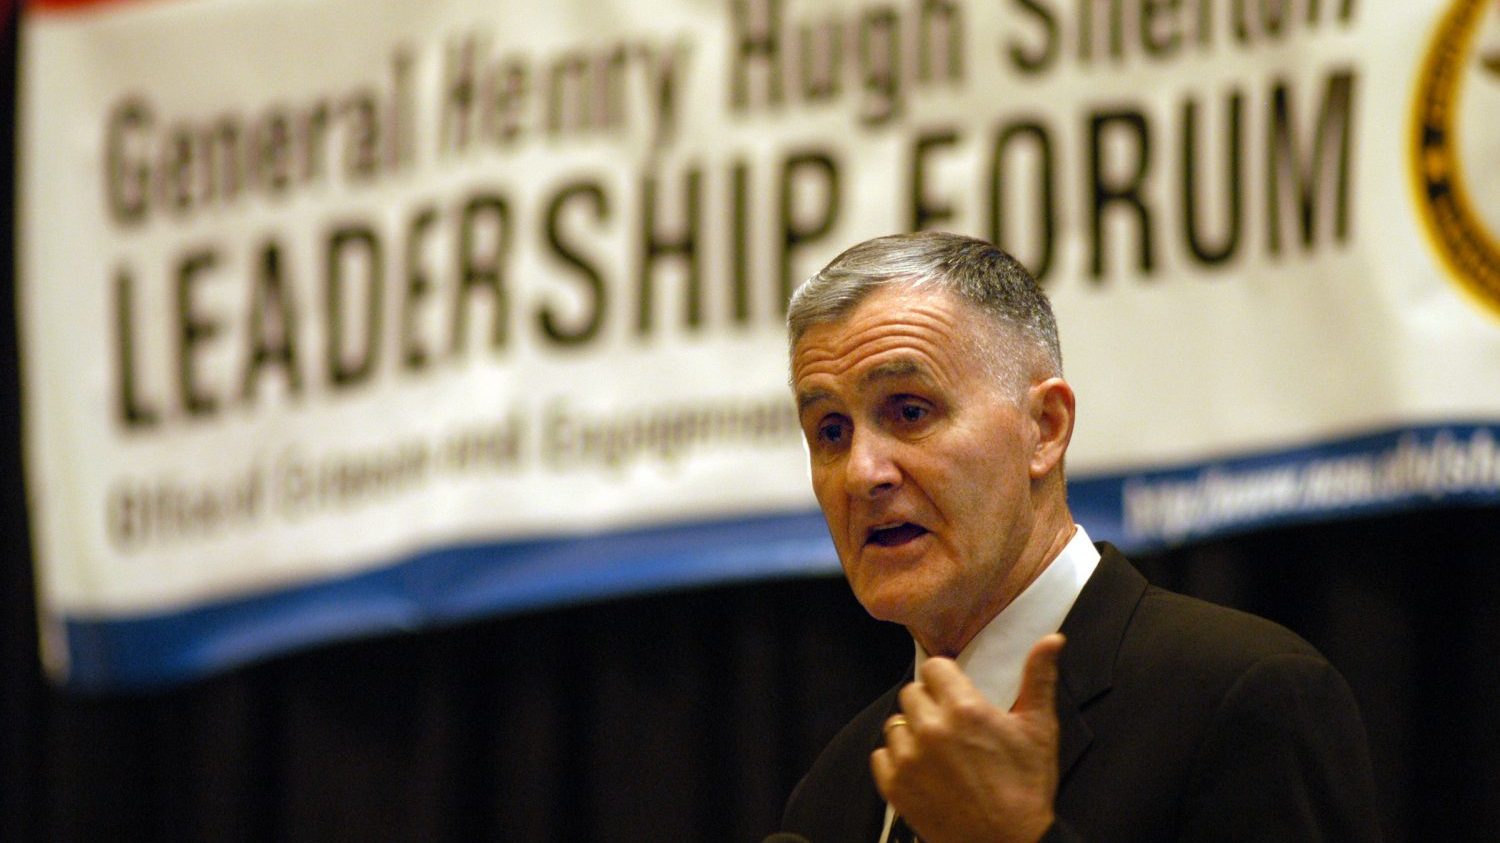 General Shelton speaking in front of a Leadership Forum banner.